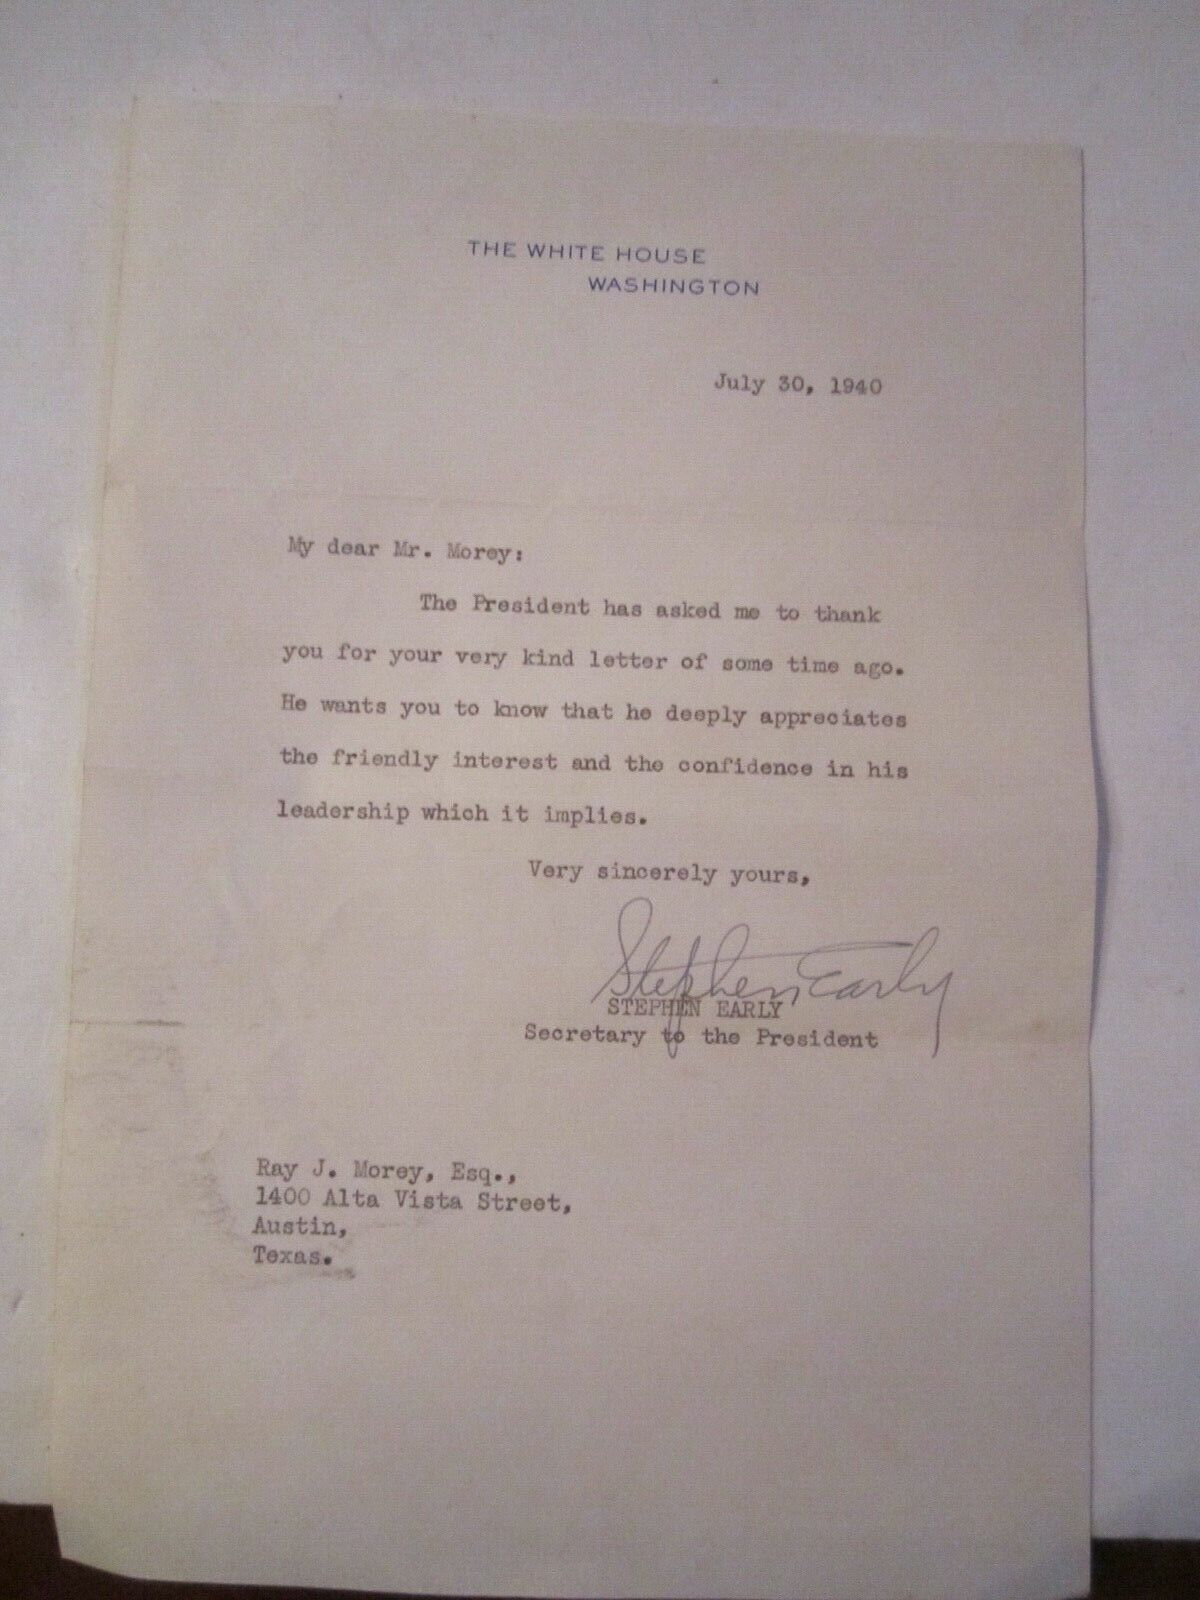 1940 RAY JEROME MOREY SIGNED LETTER FROM THE STEPHEN EARLY SEC'Y TO FDR - BN-19